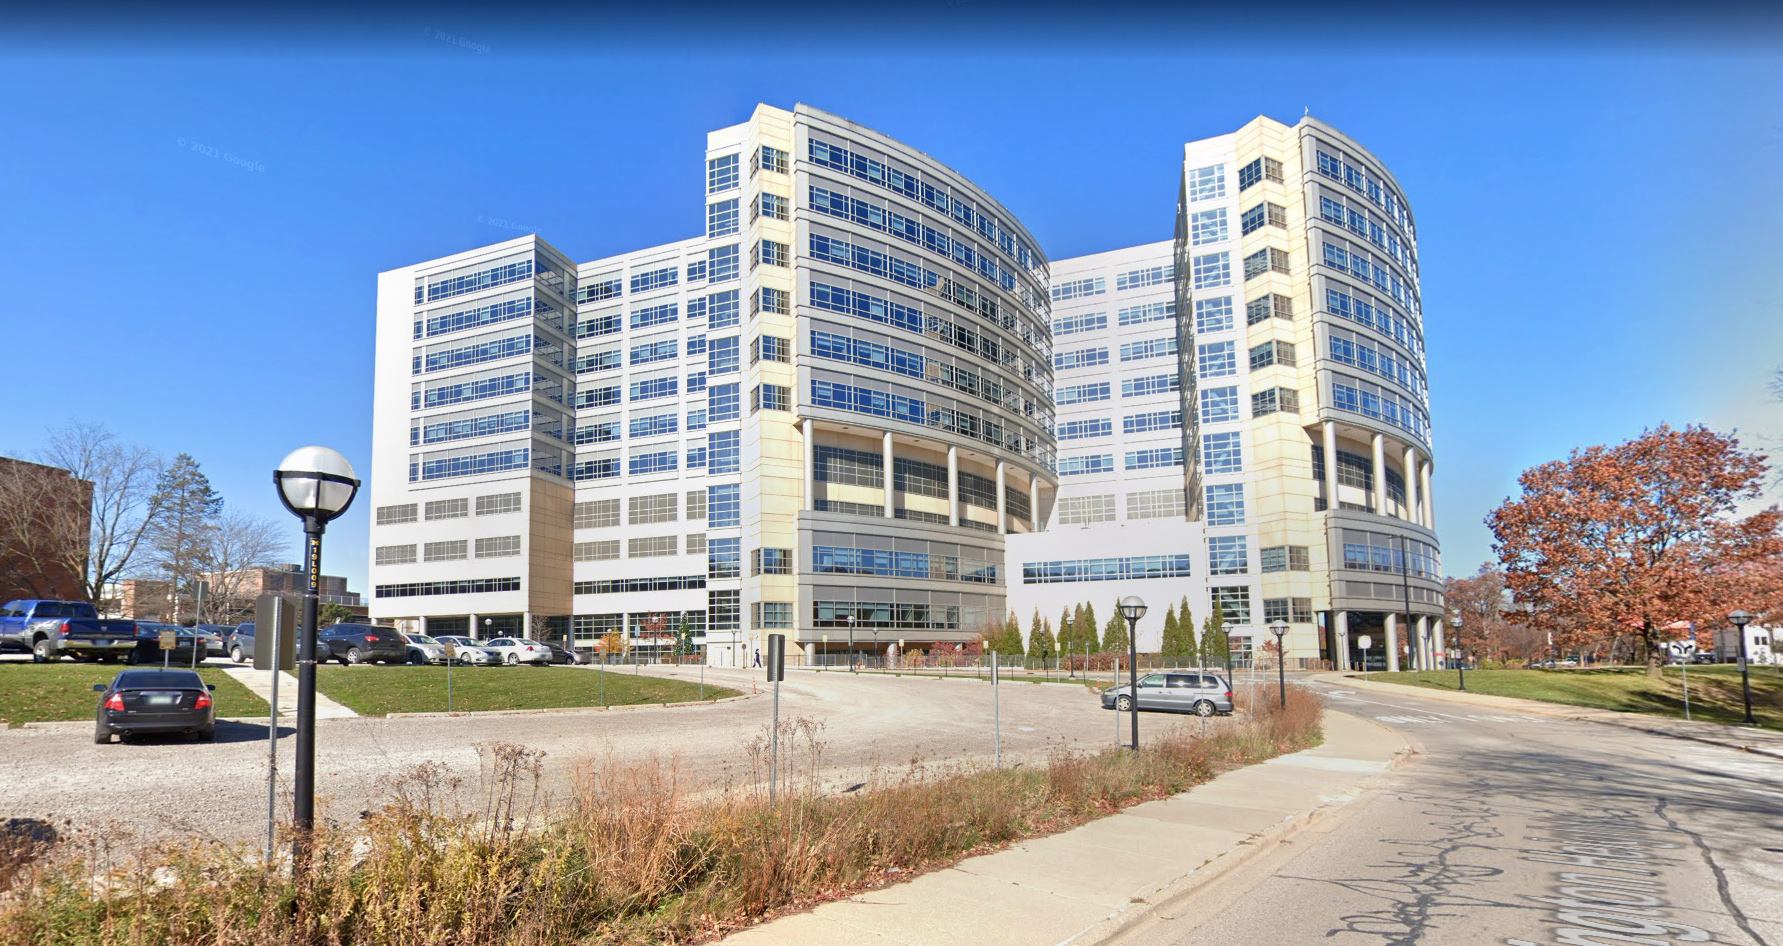 PHOTO: The Children's Hospital in Ann Arbor, Mich., in an image from Google Street View 2020.